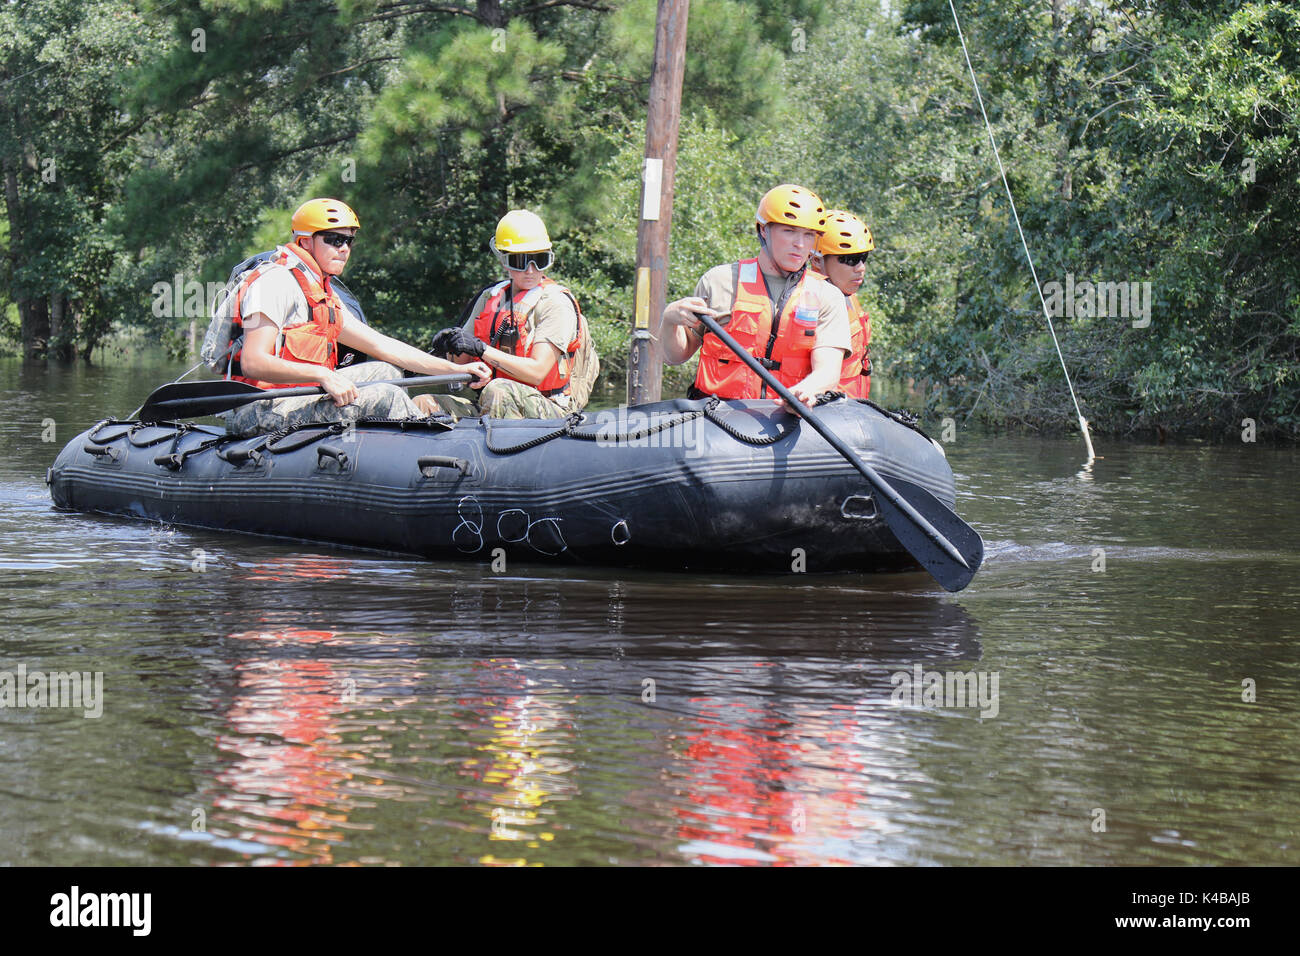 U.S Army soldiers use a rubber boat to search for residents in need of assistance trapped by floodwaters in the aftermath of Hurricane Harvey September 4, 2017 in Port Arthur, Texas. Stock Photo